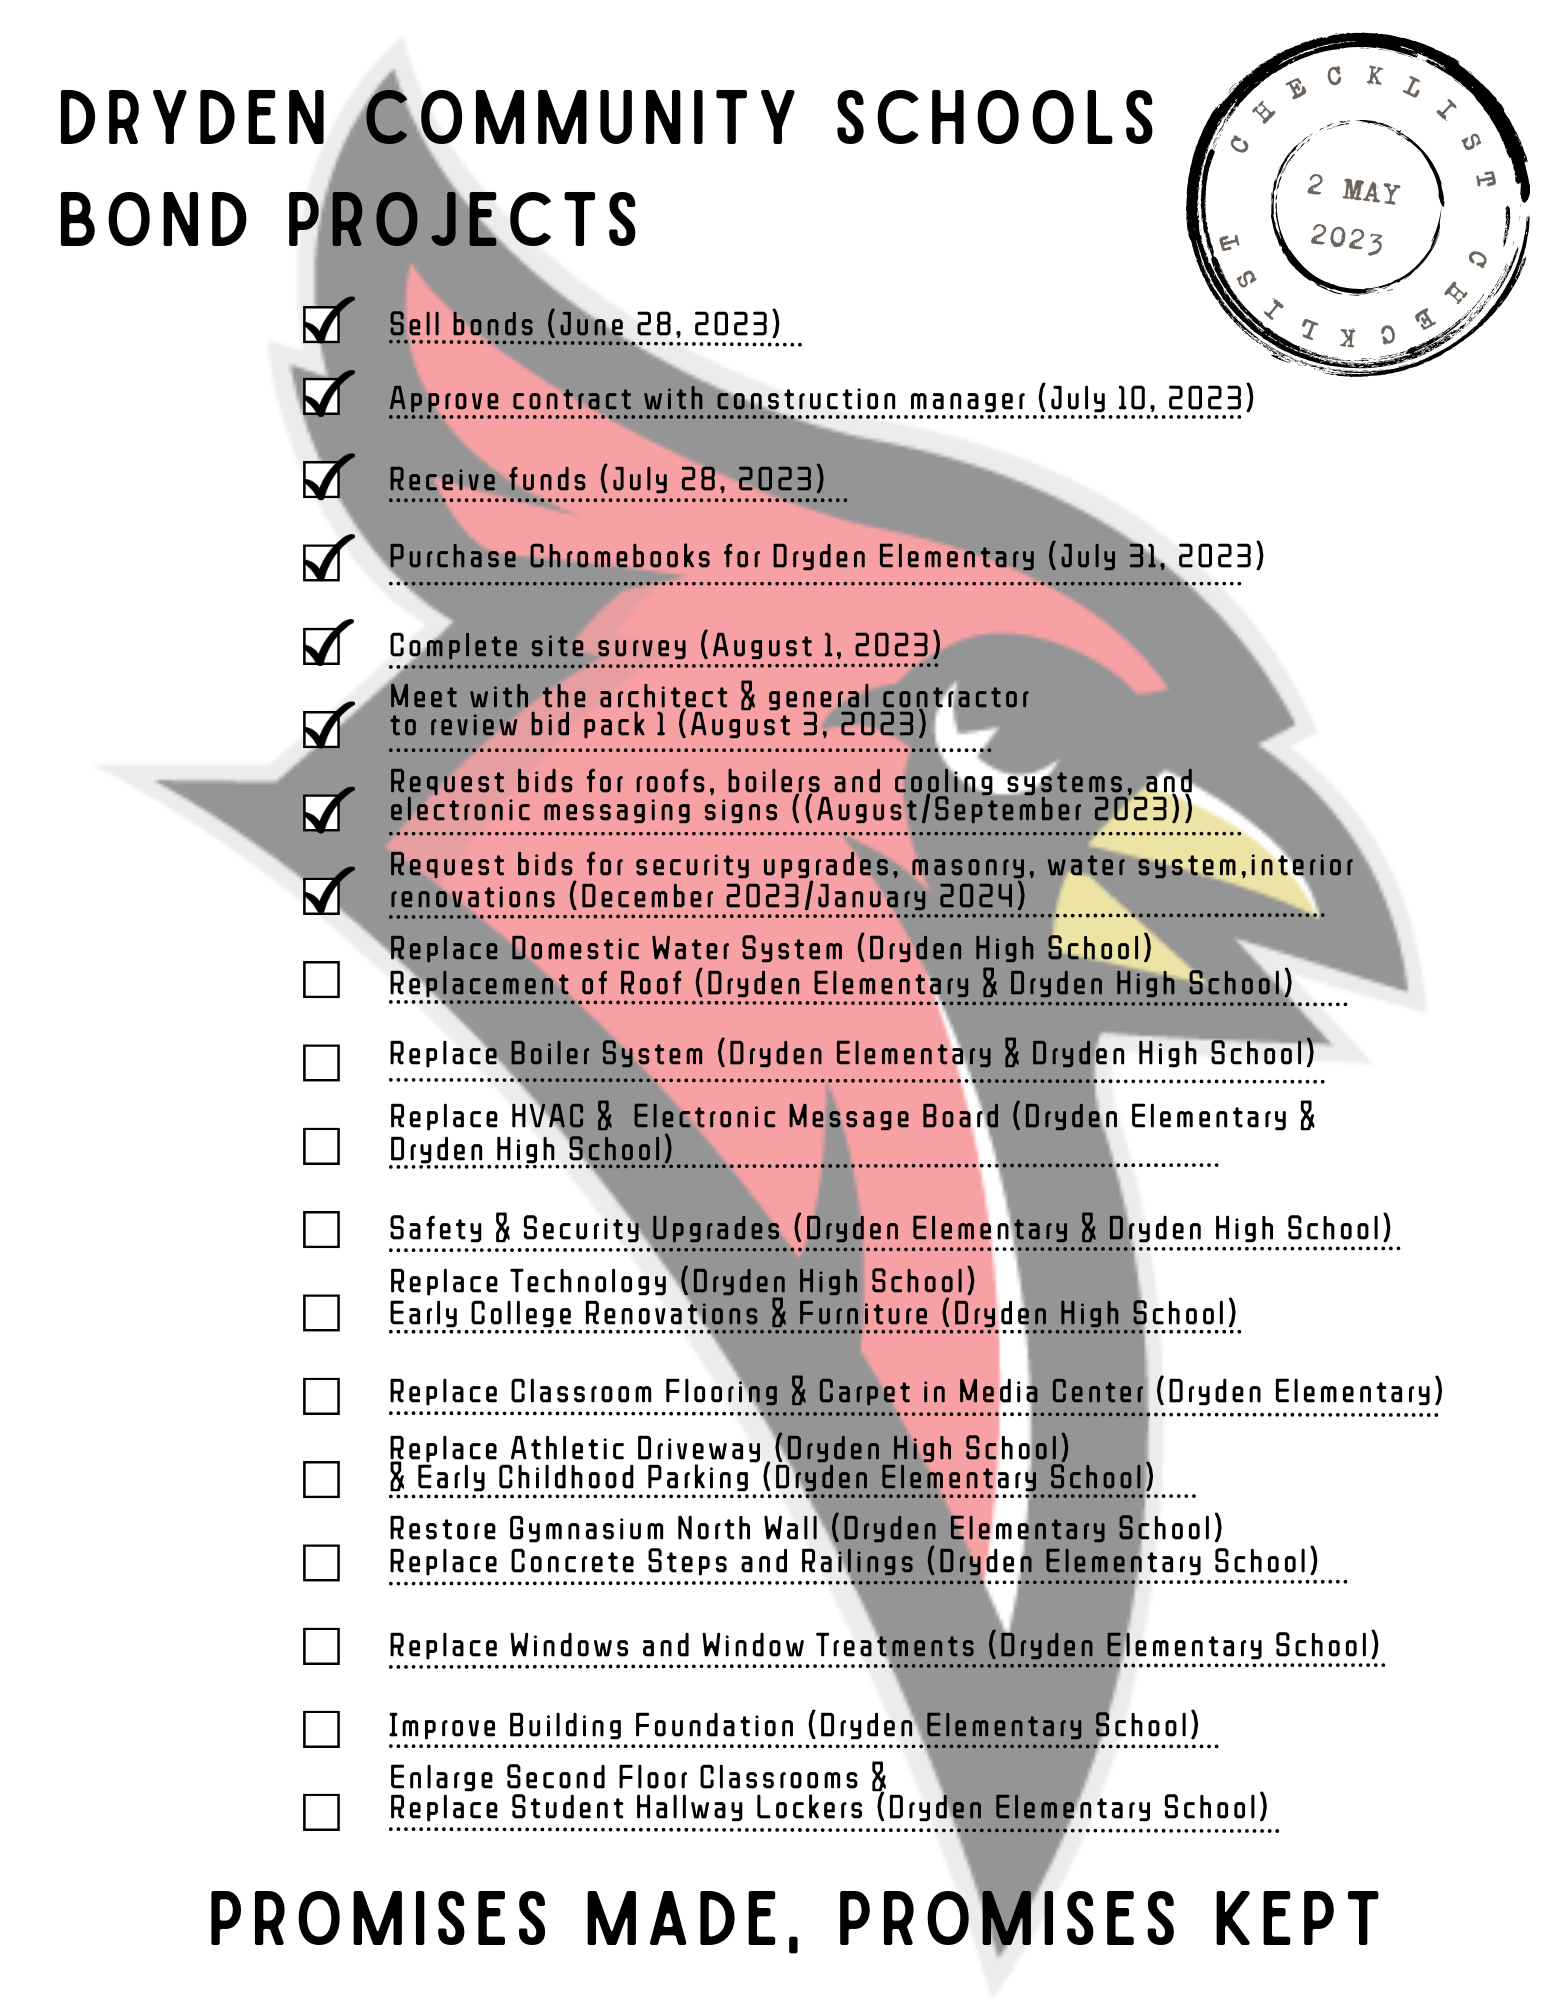 Dryden Bond Checklist showing what has been accomplished so far